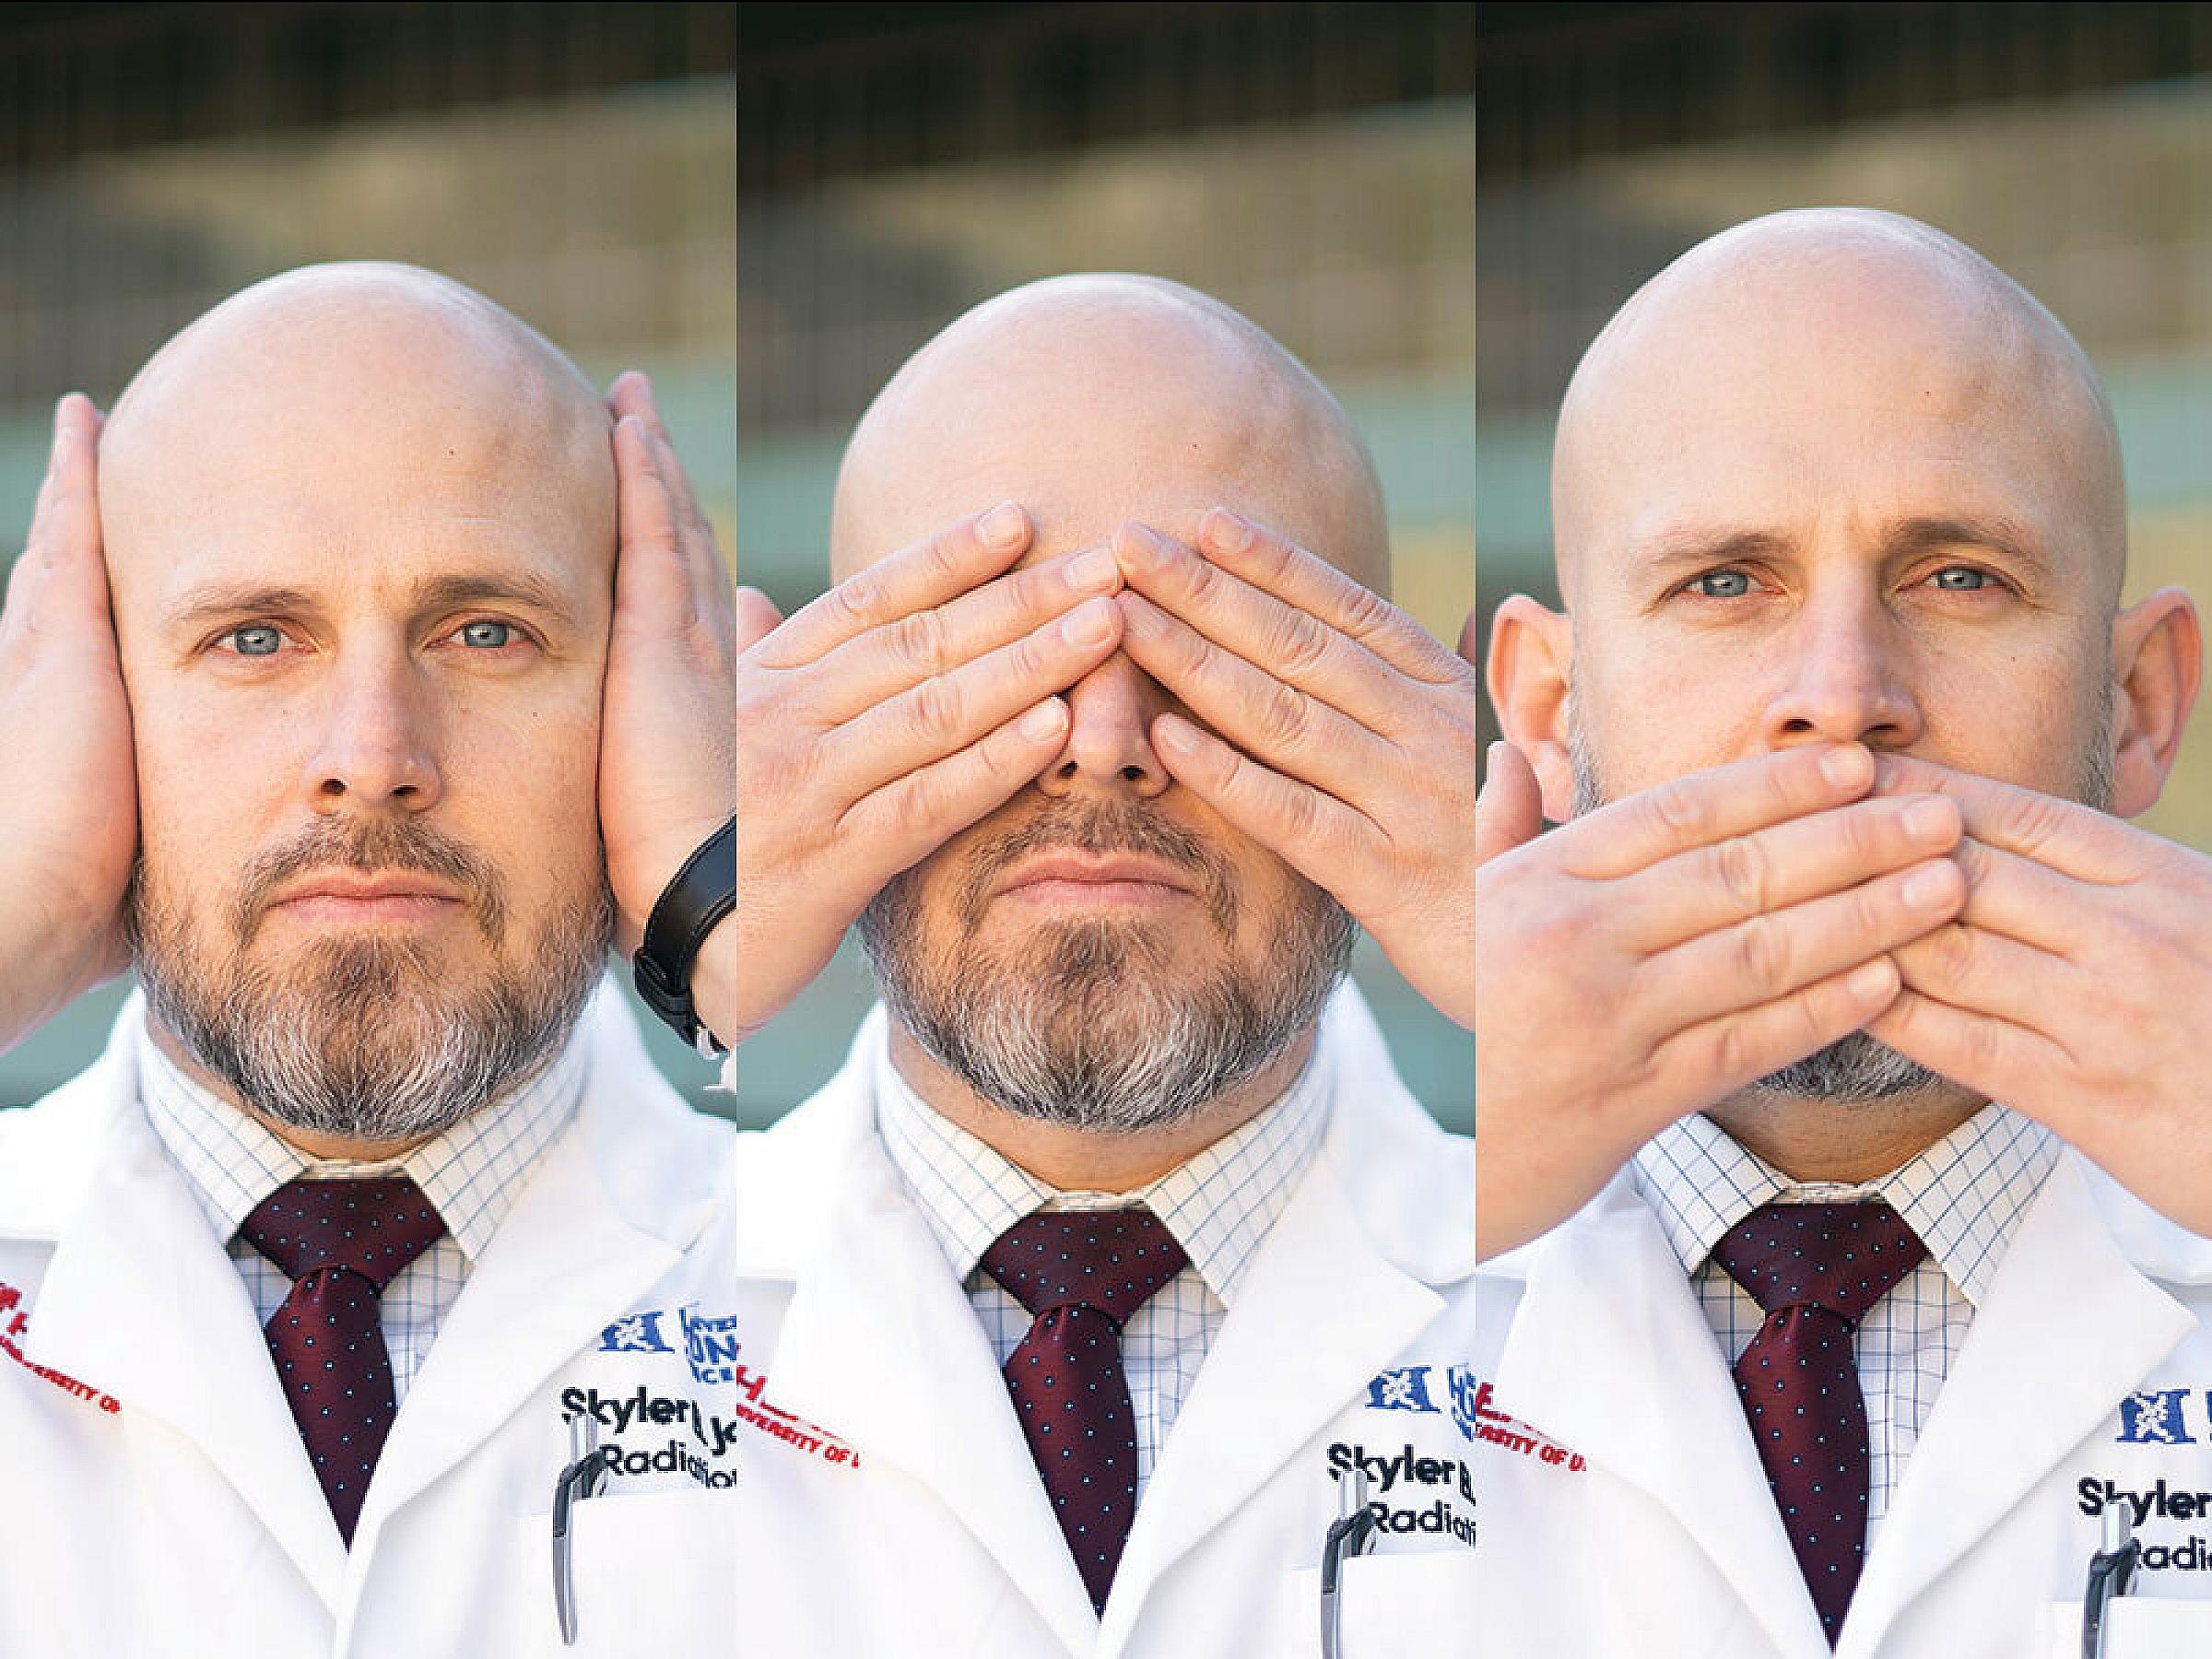 Side-by-side photos of Skyler Johnson, MB covering his eyes, ears, and mouth